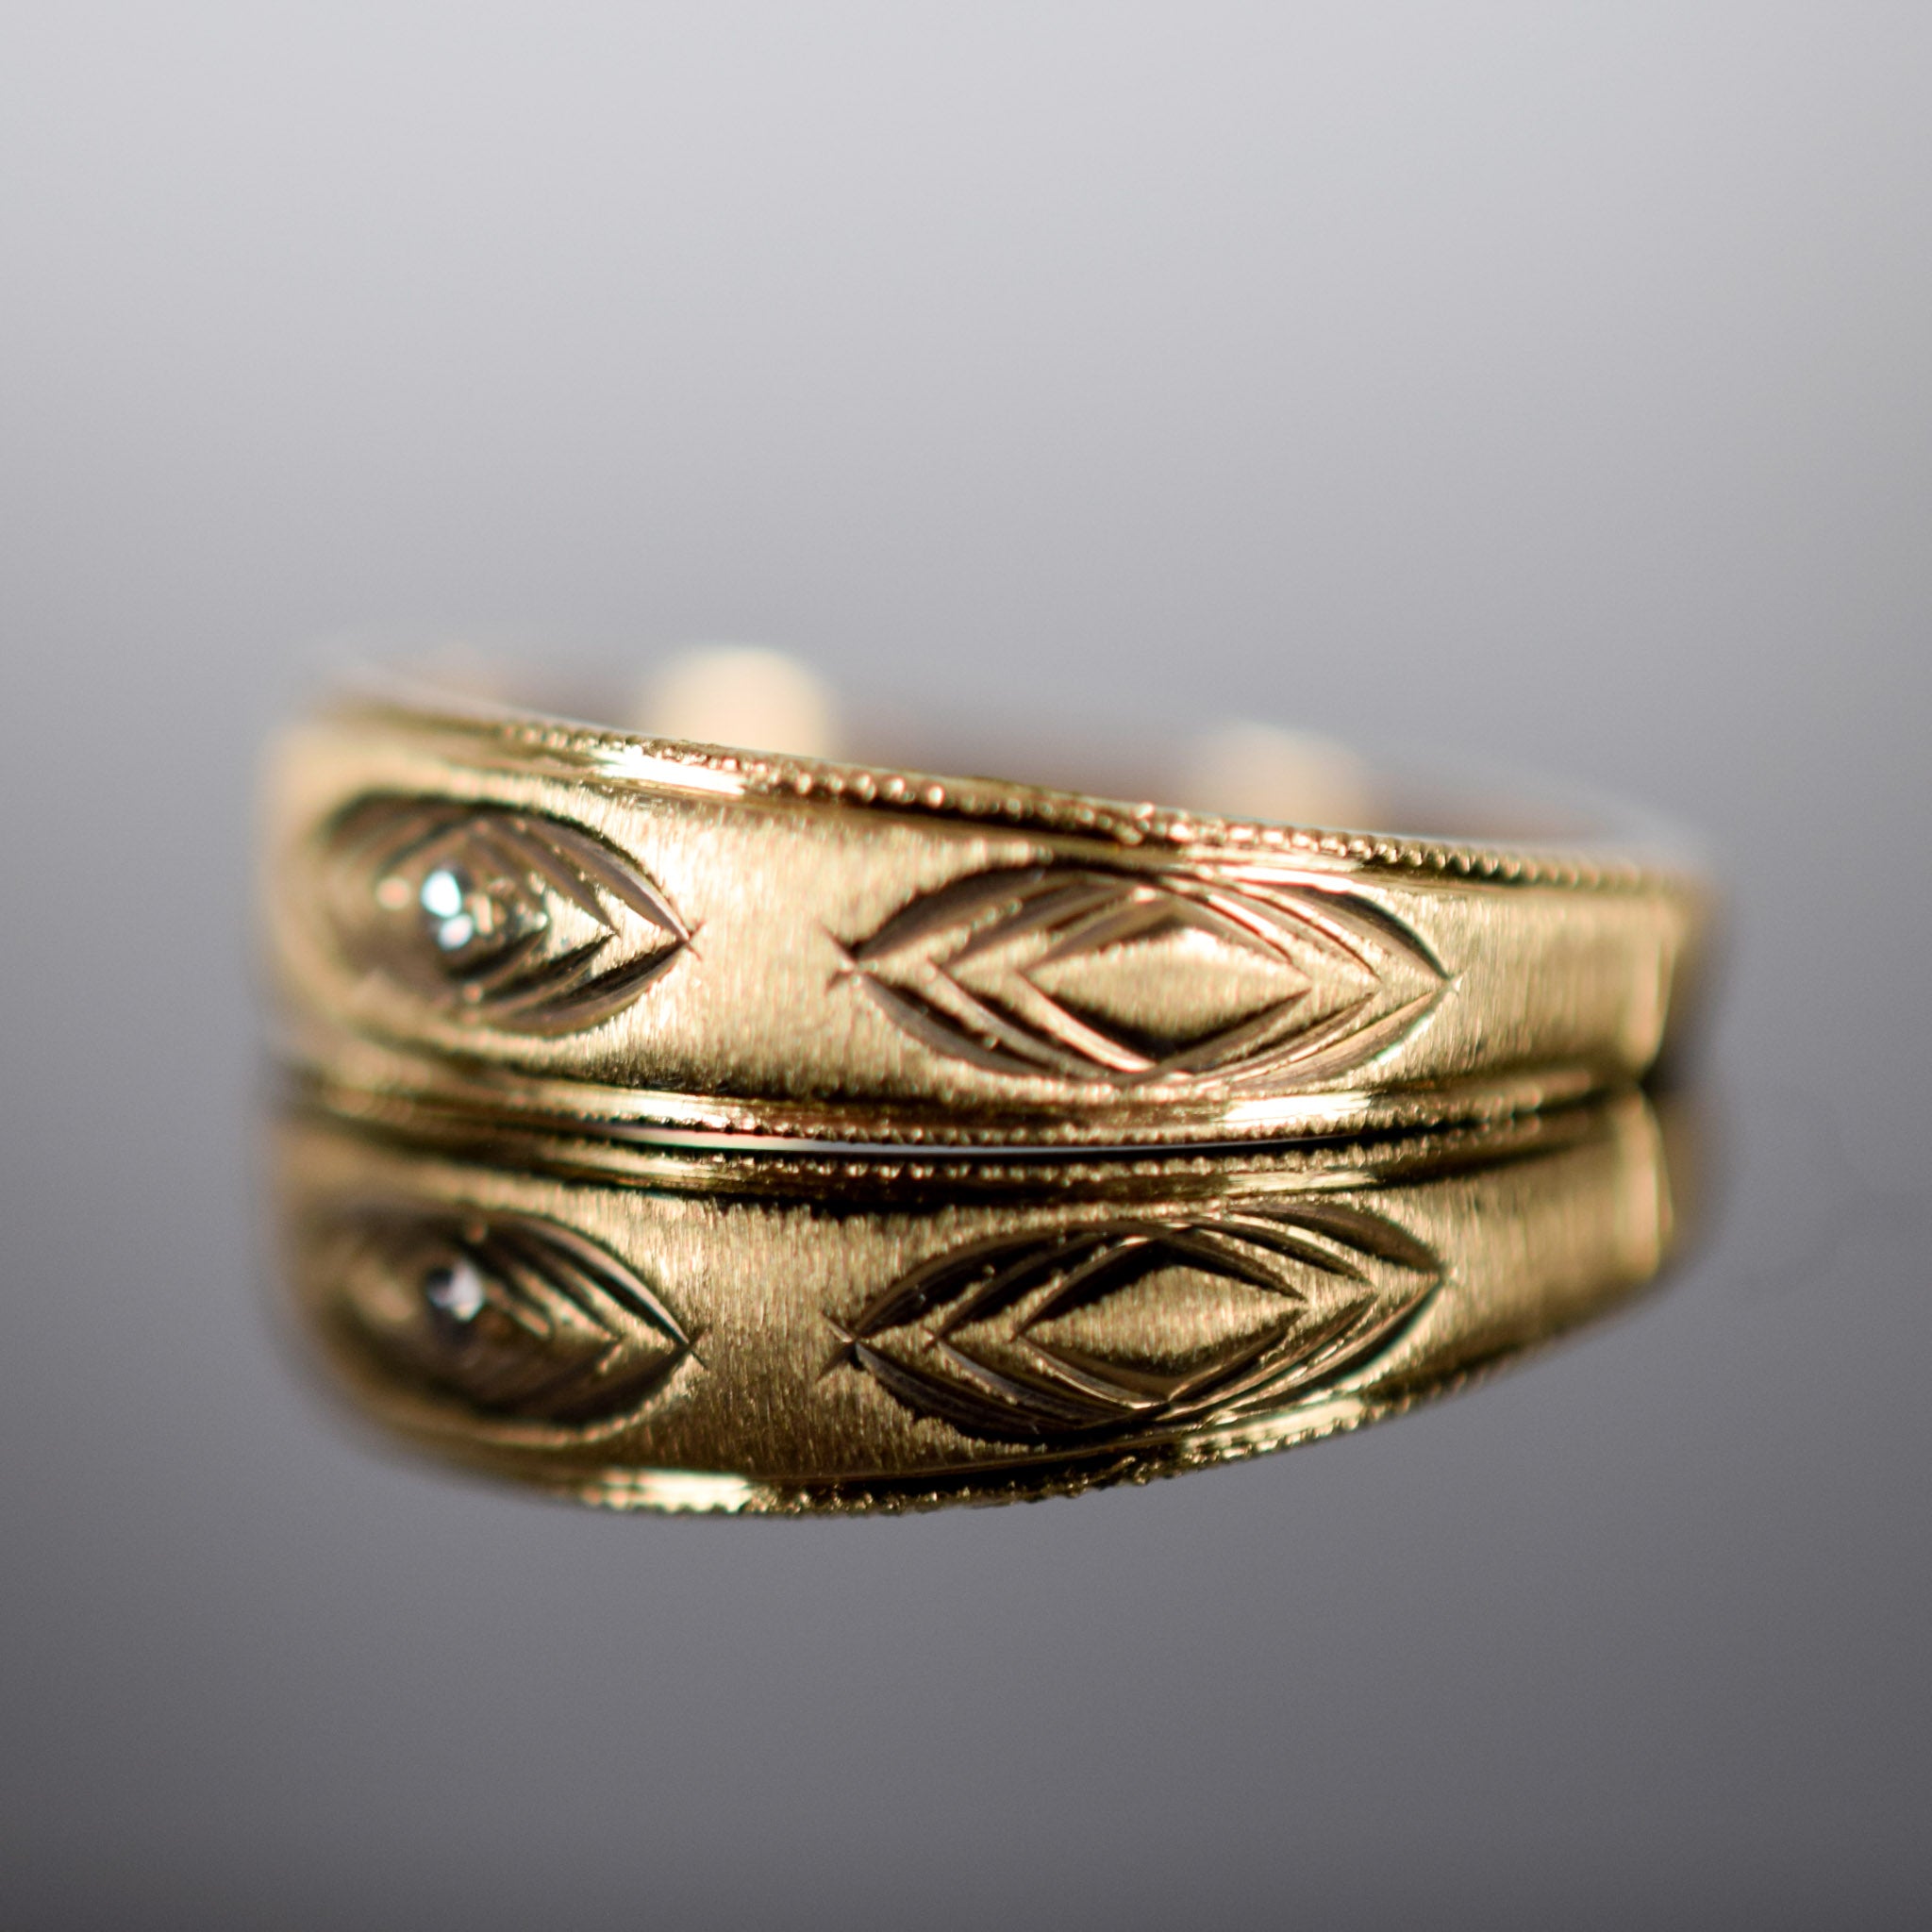 gorgeous intricate gold band for sale, folklor